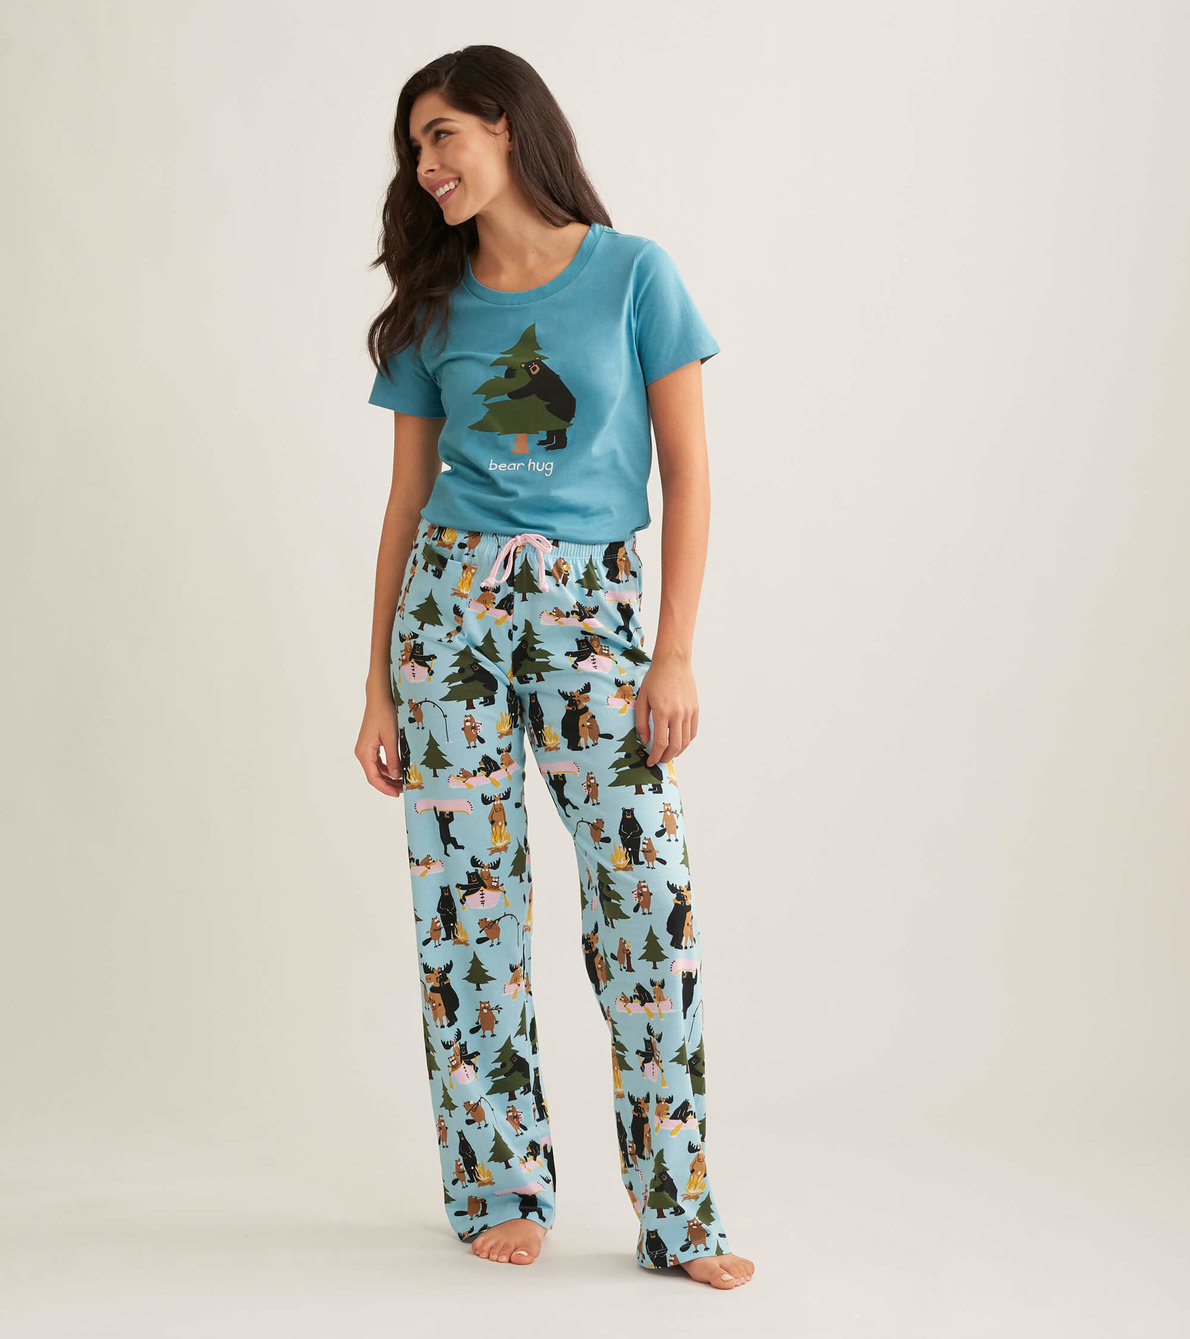 View larger image of Life in The Wild Women's Tee and Pants Pajama Separates